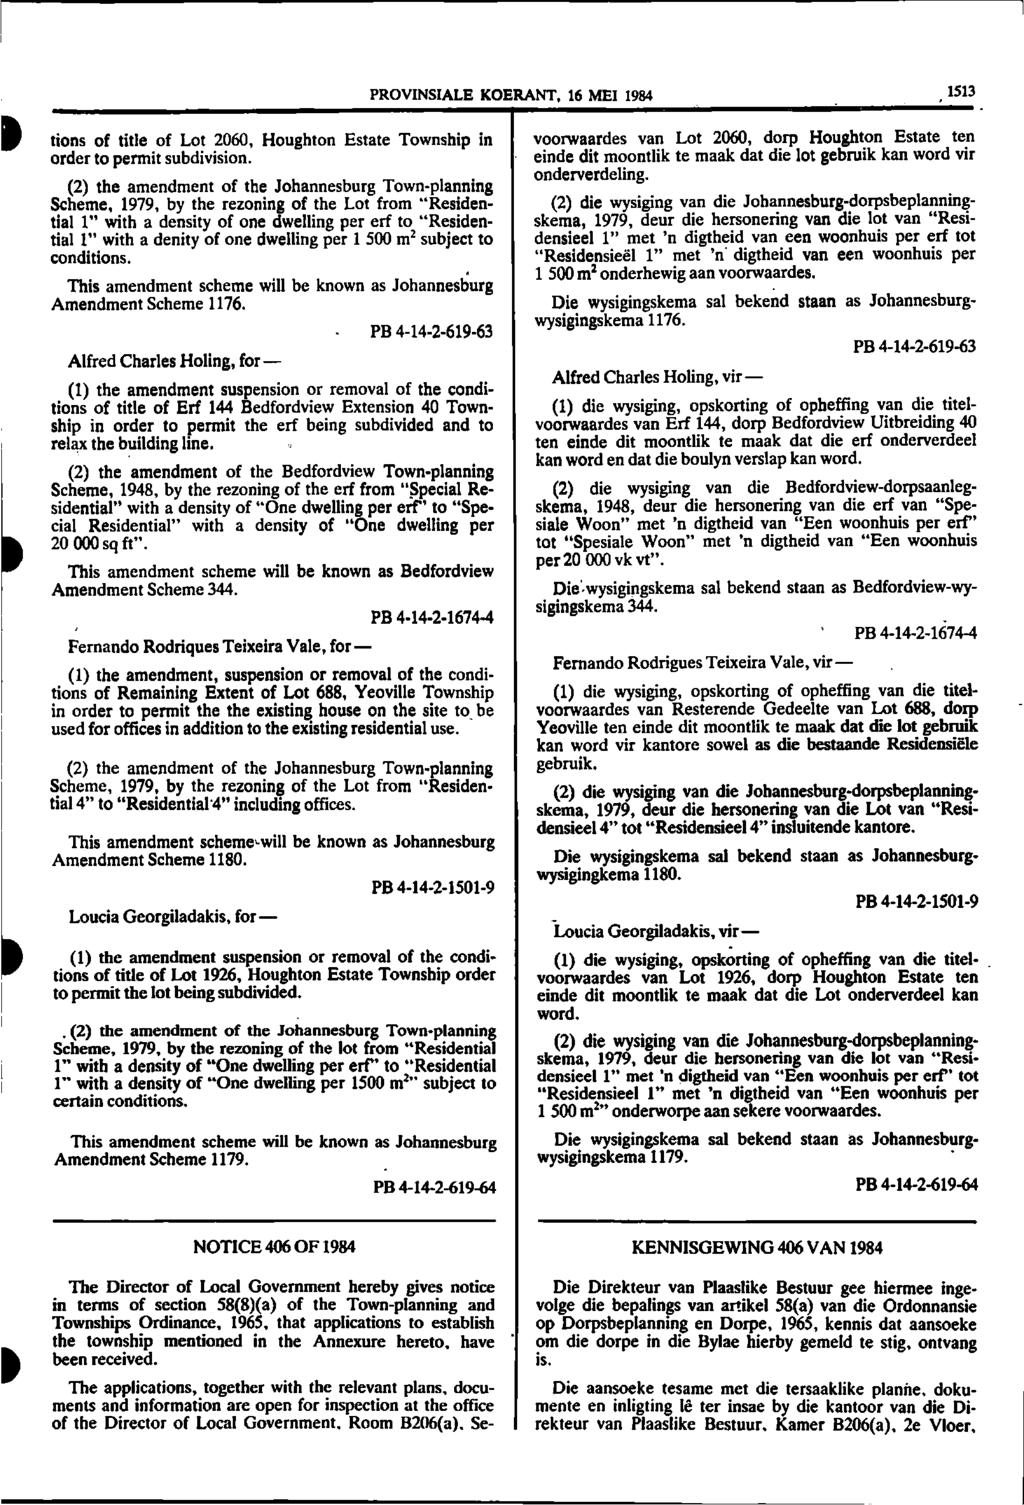 PROVINSIALE KOERANT, 16 MEI 1984 1513 tions of title of Lot 2060, Houghton Estate Township in order to permit subdivision.